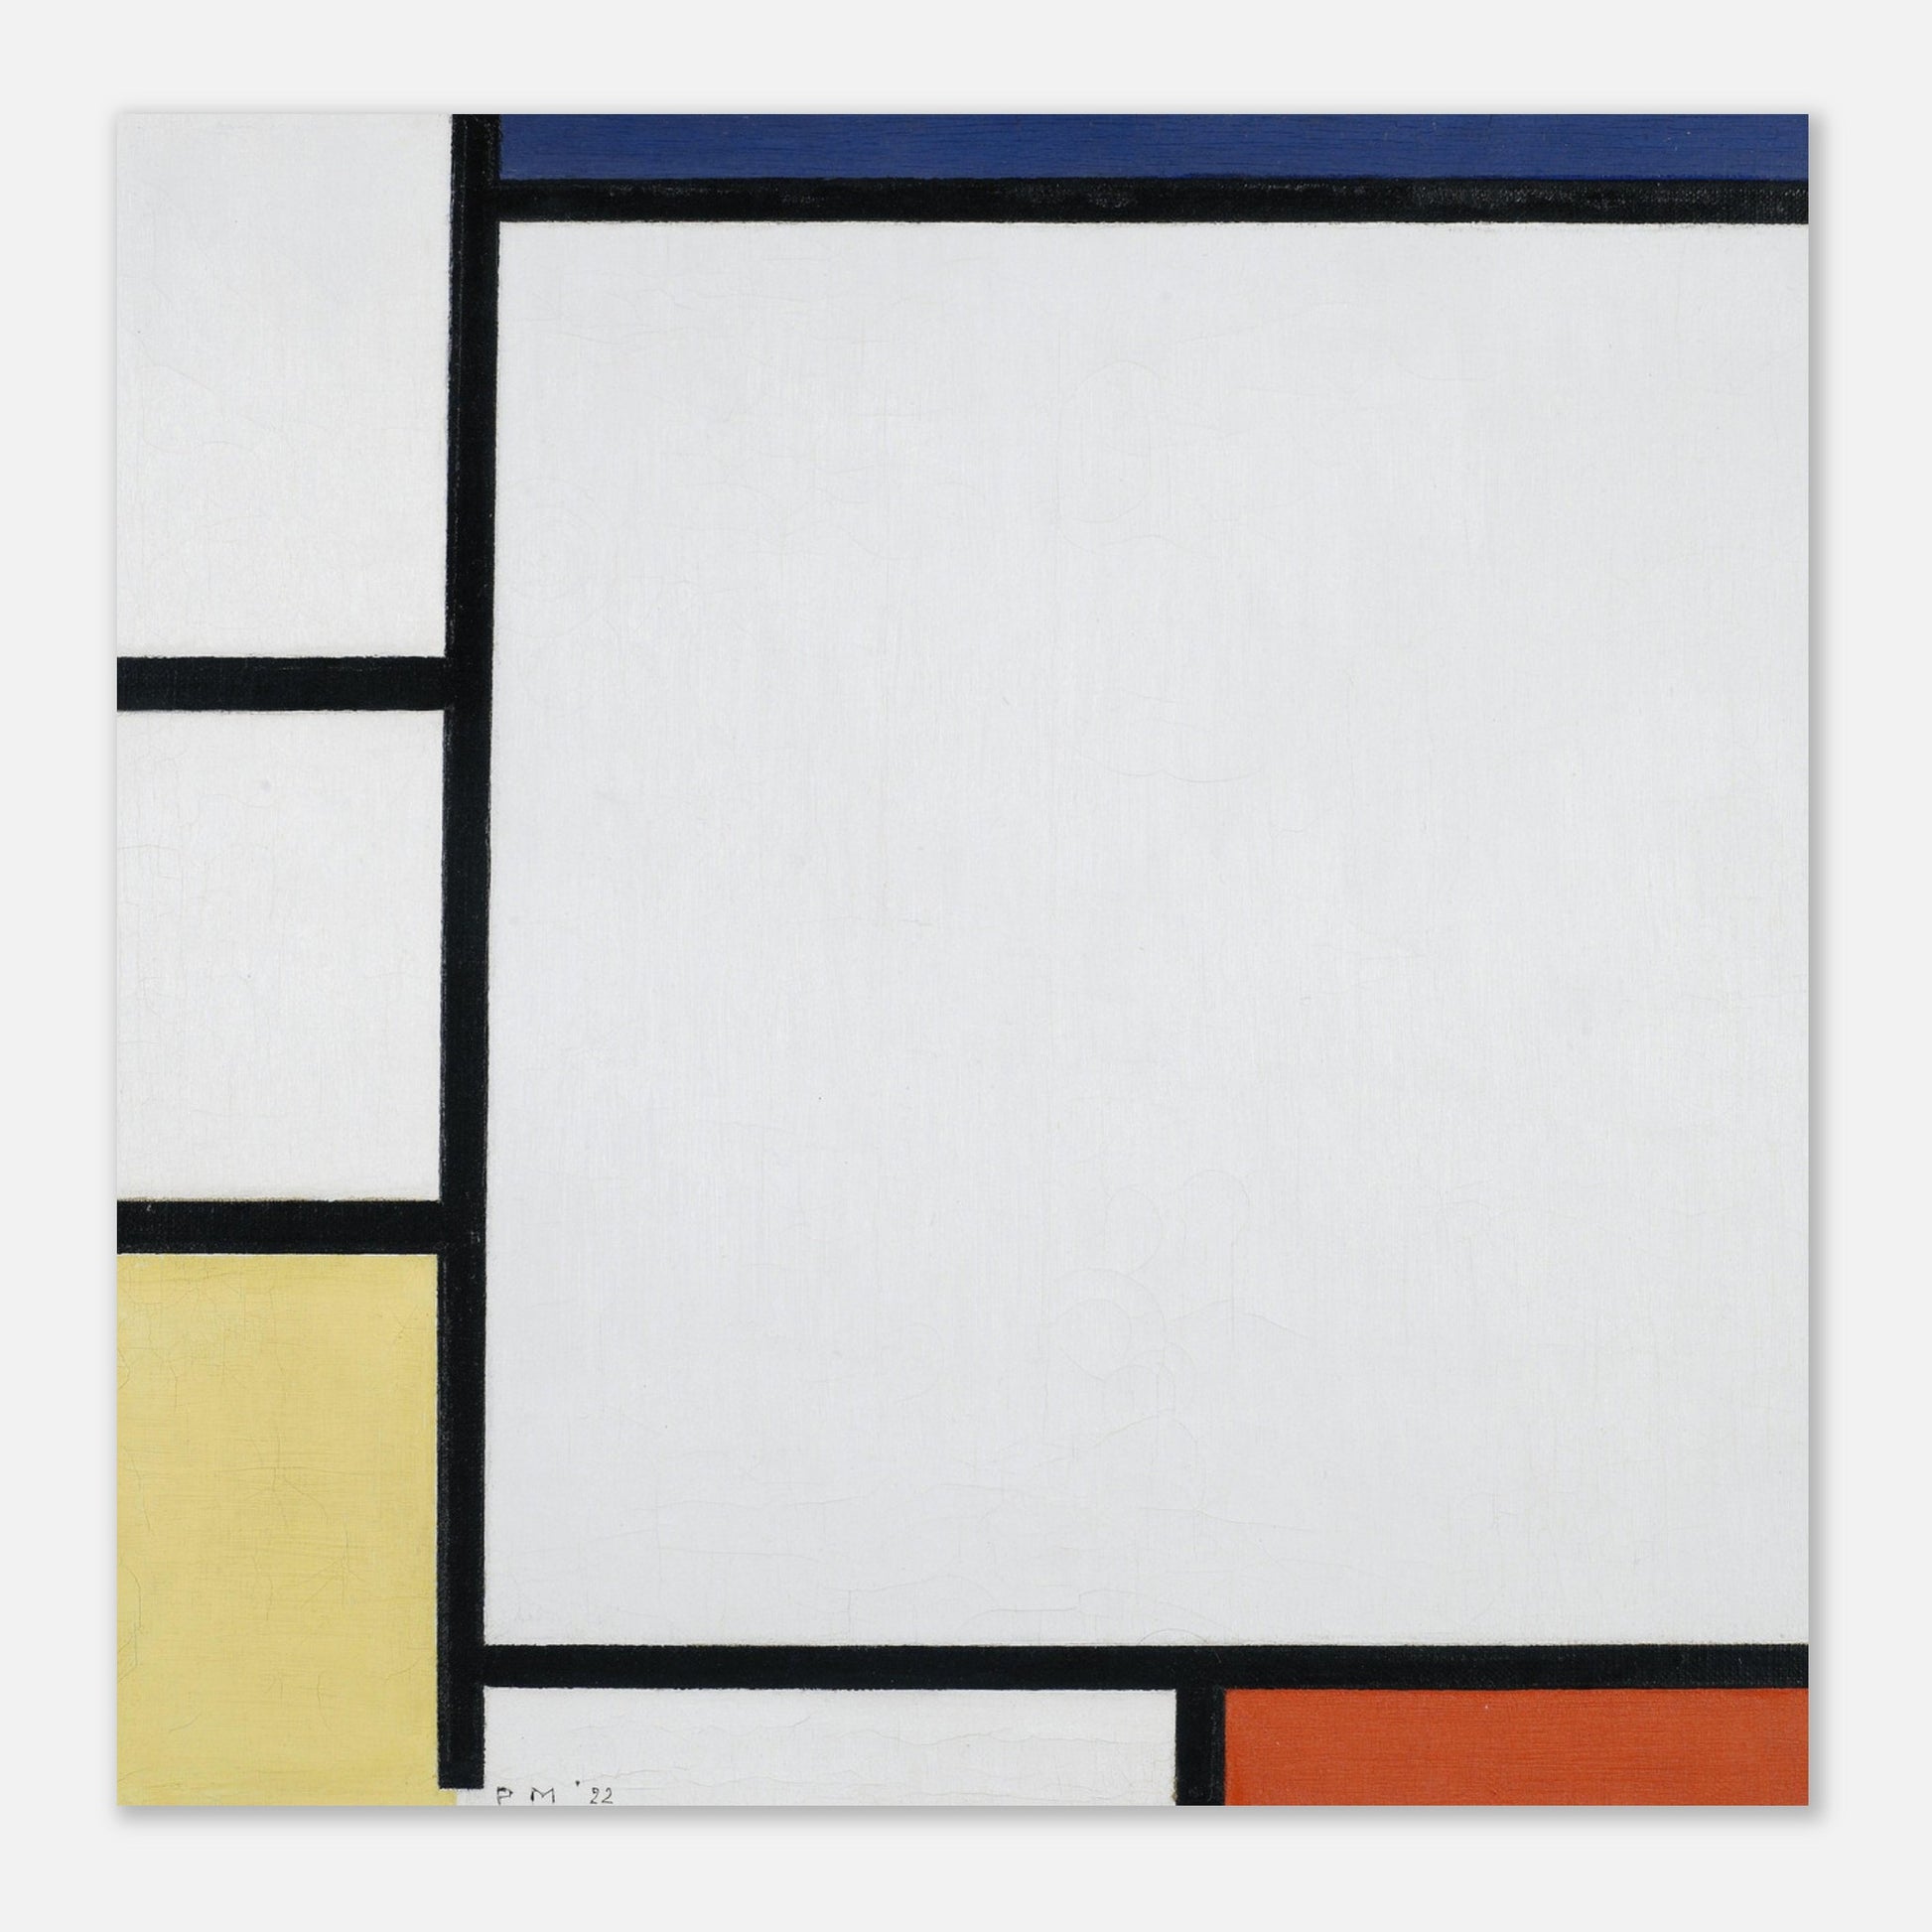 PIET MONDRIAN - COMPOSITION WITH BLUE, RED, YELLOW AND BLACK (1922) - ALUMINUM PRINT